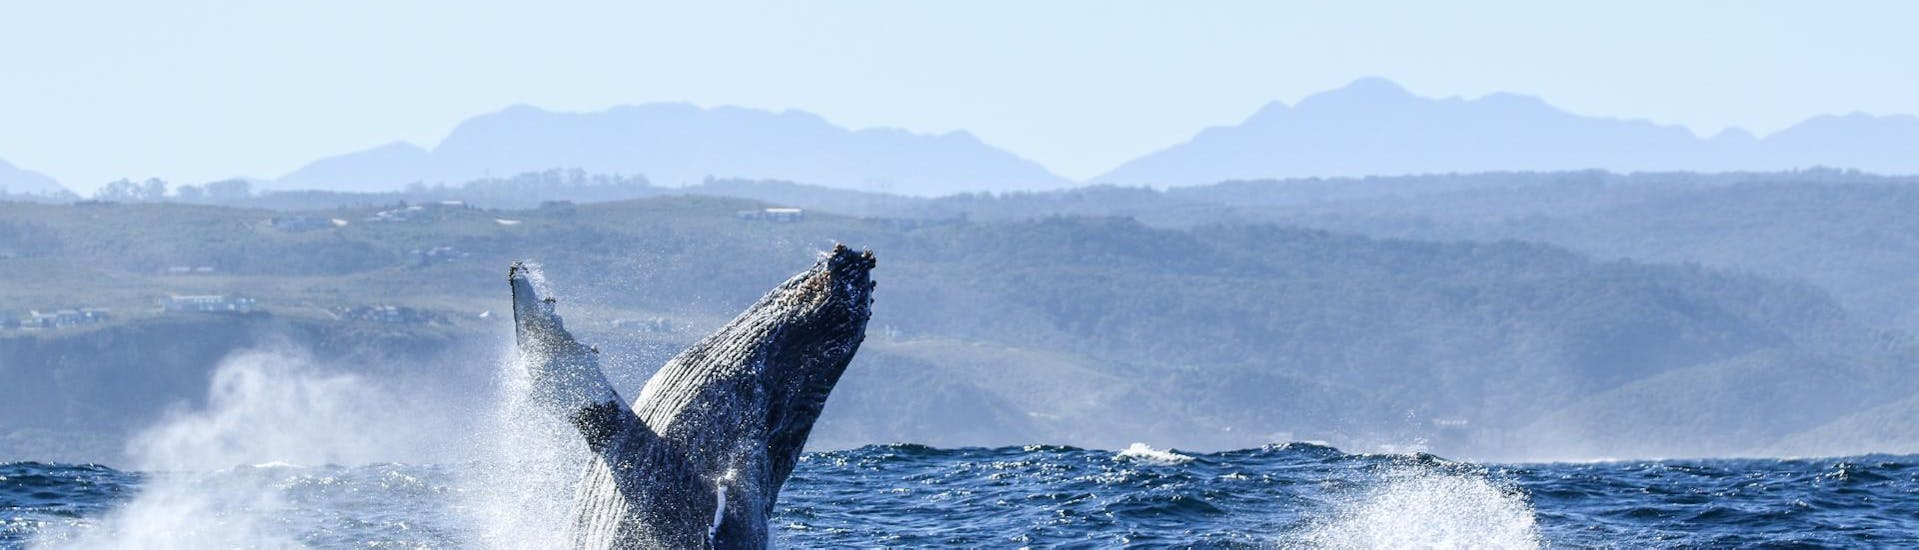 Tourists on Ocean Odyssey Garden Route vessel are experiencing the incredible acrobatic skills of a whale humpback in Indian ocean.